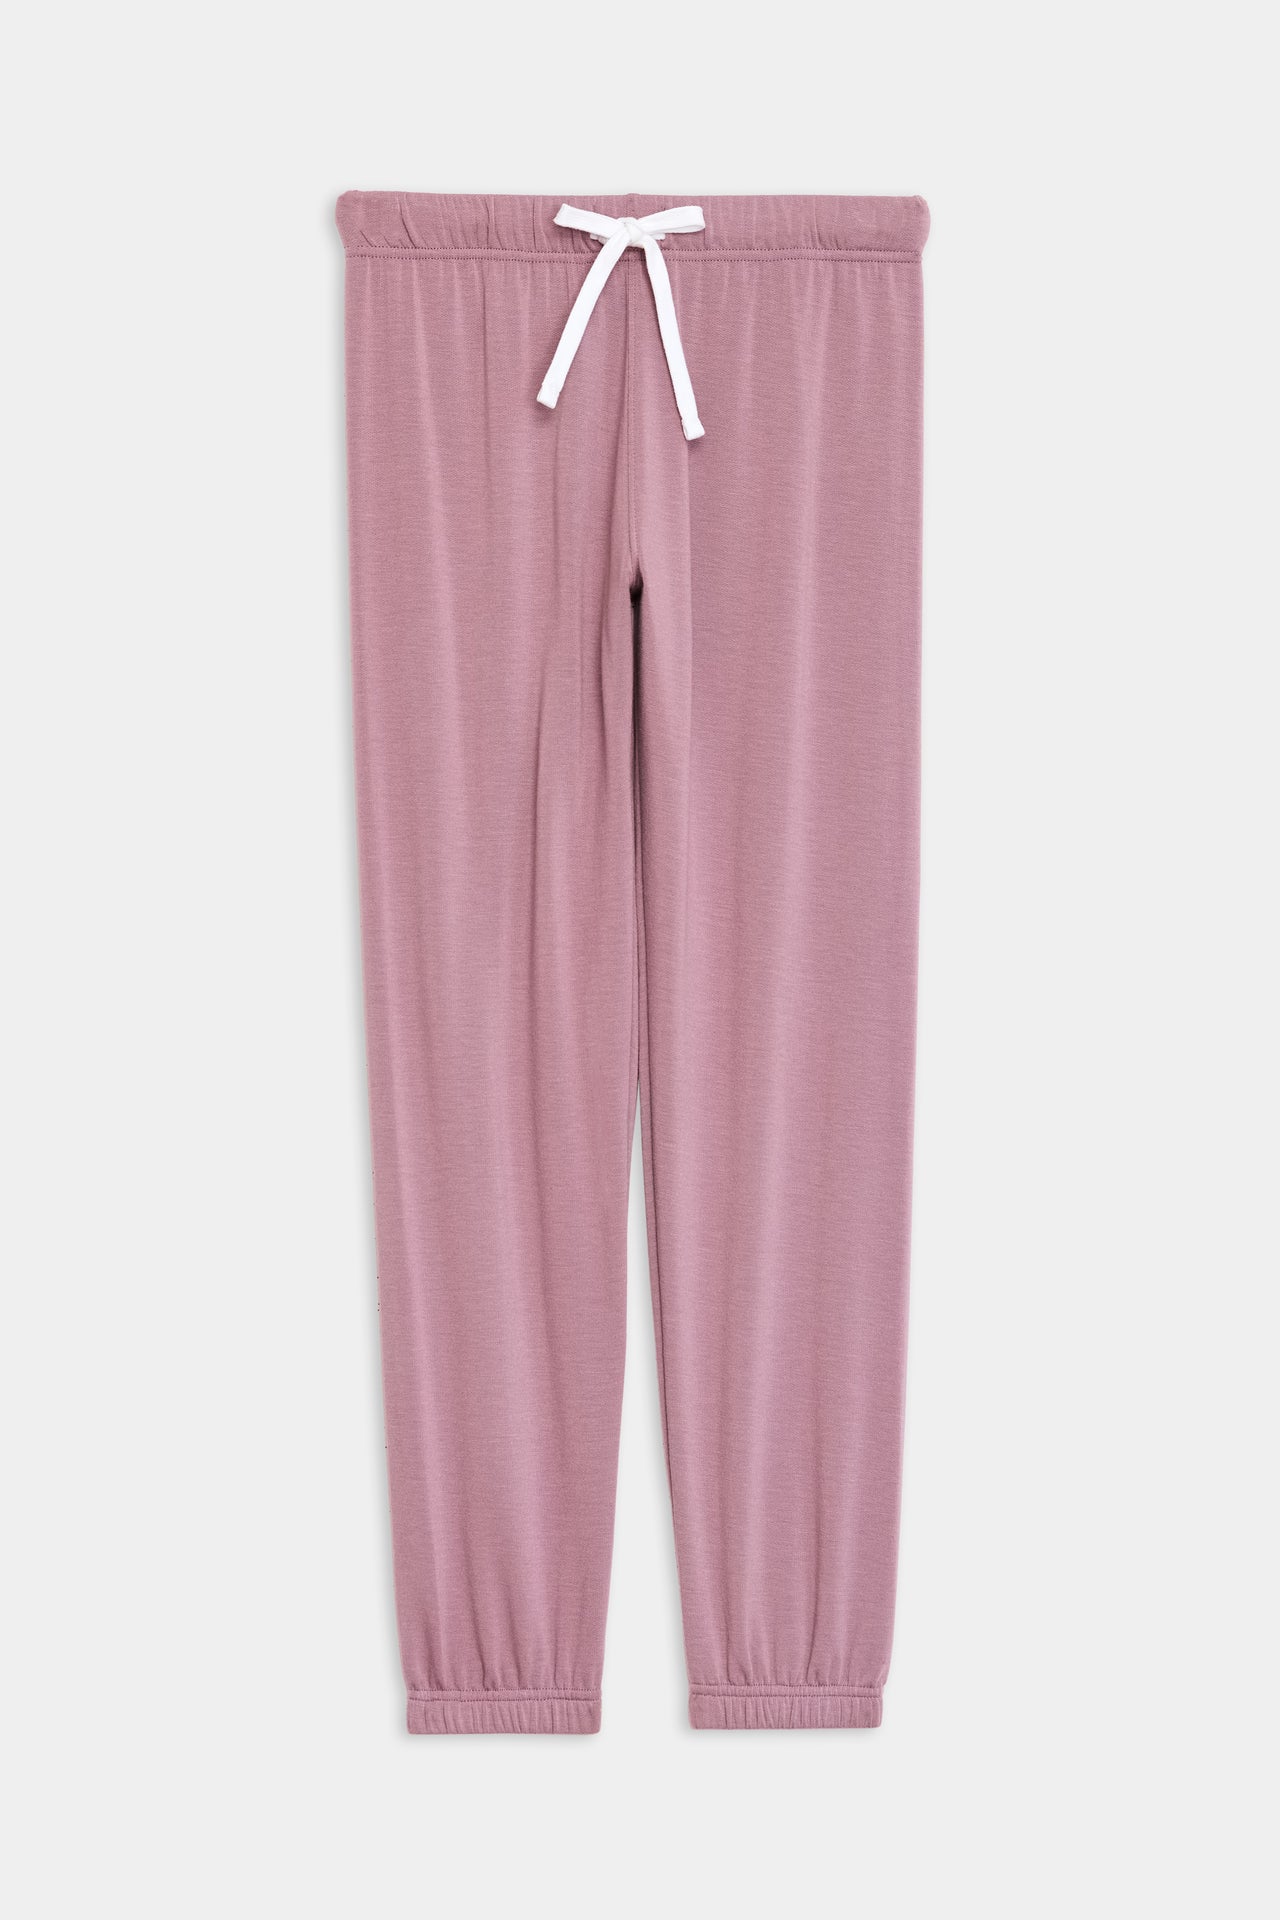 Front flat view of llight pink sweatpant jogger with white drawstring